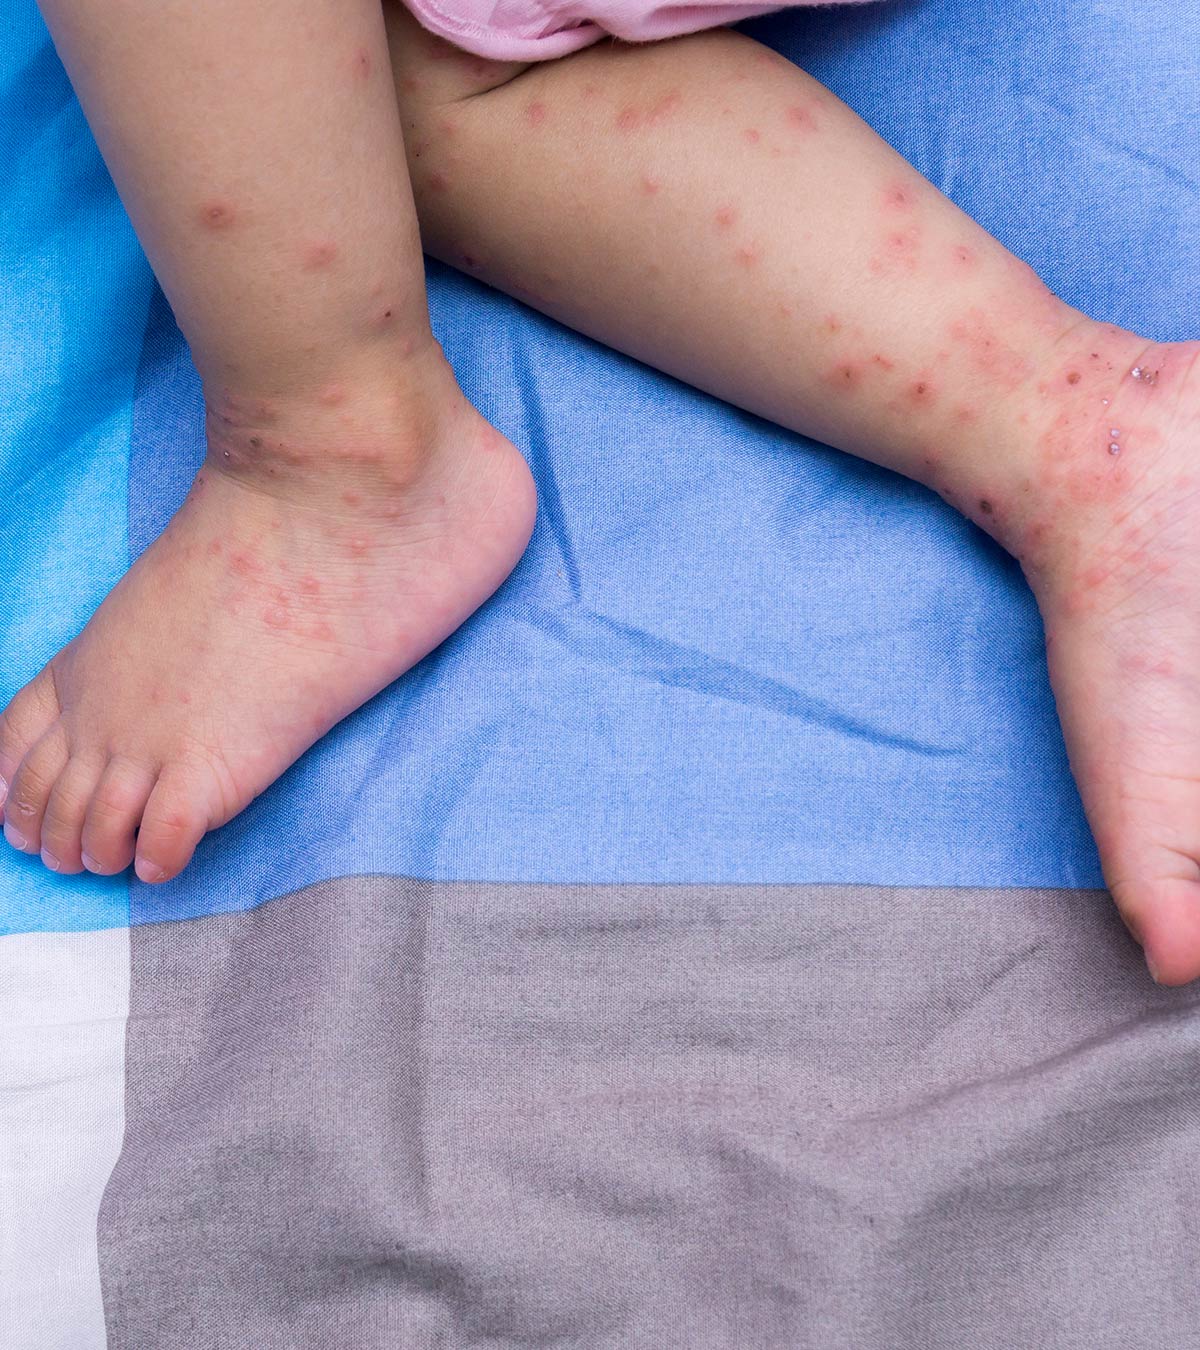 6 Symptoms And Causes Of Hand, Foot And Mouth Disease In Babies